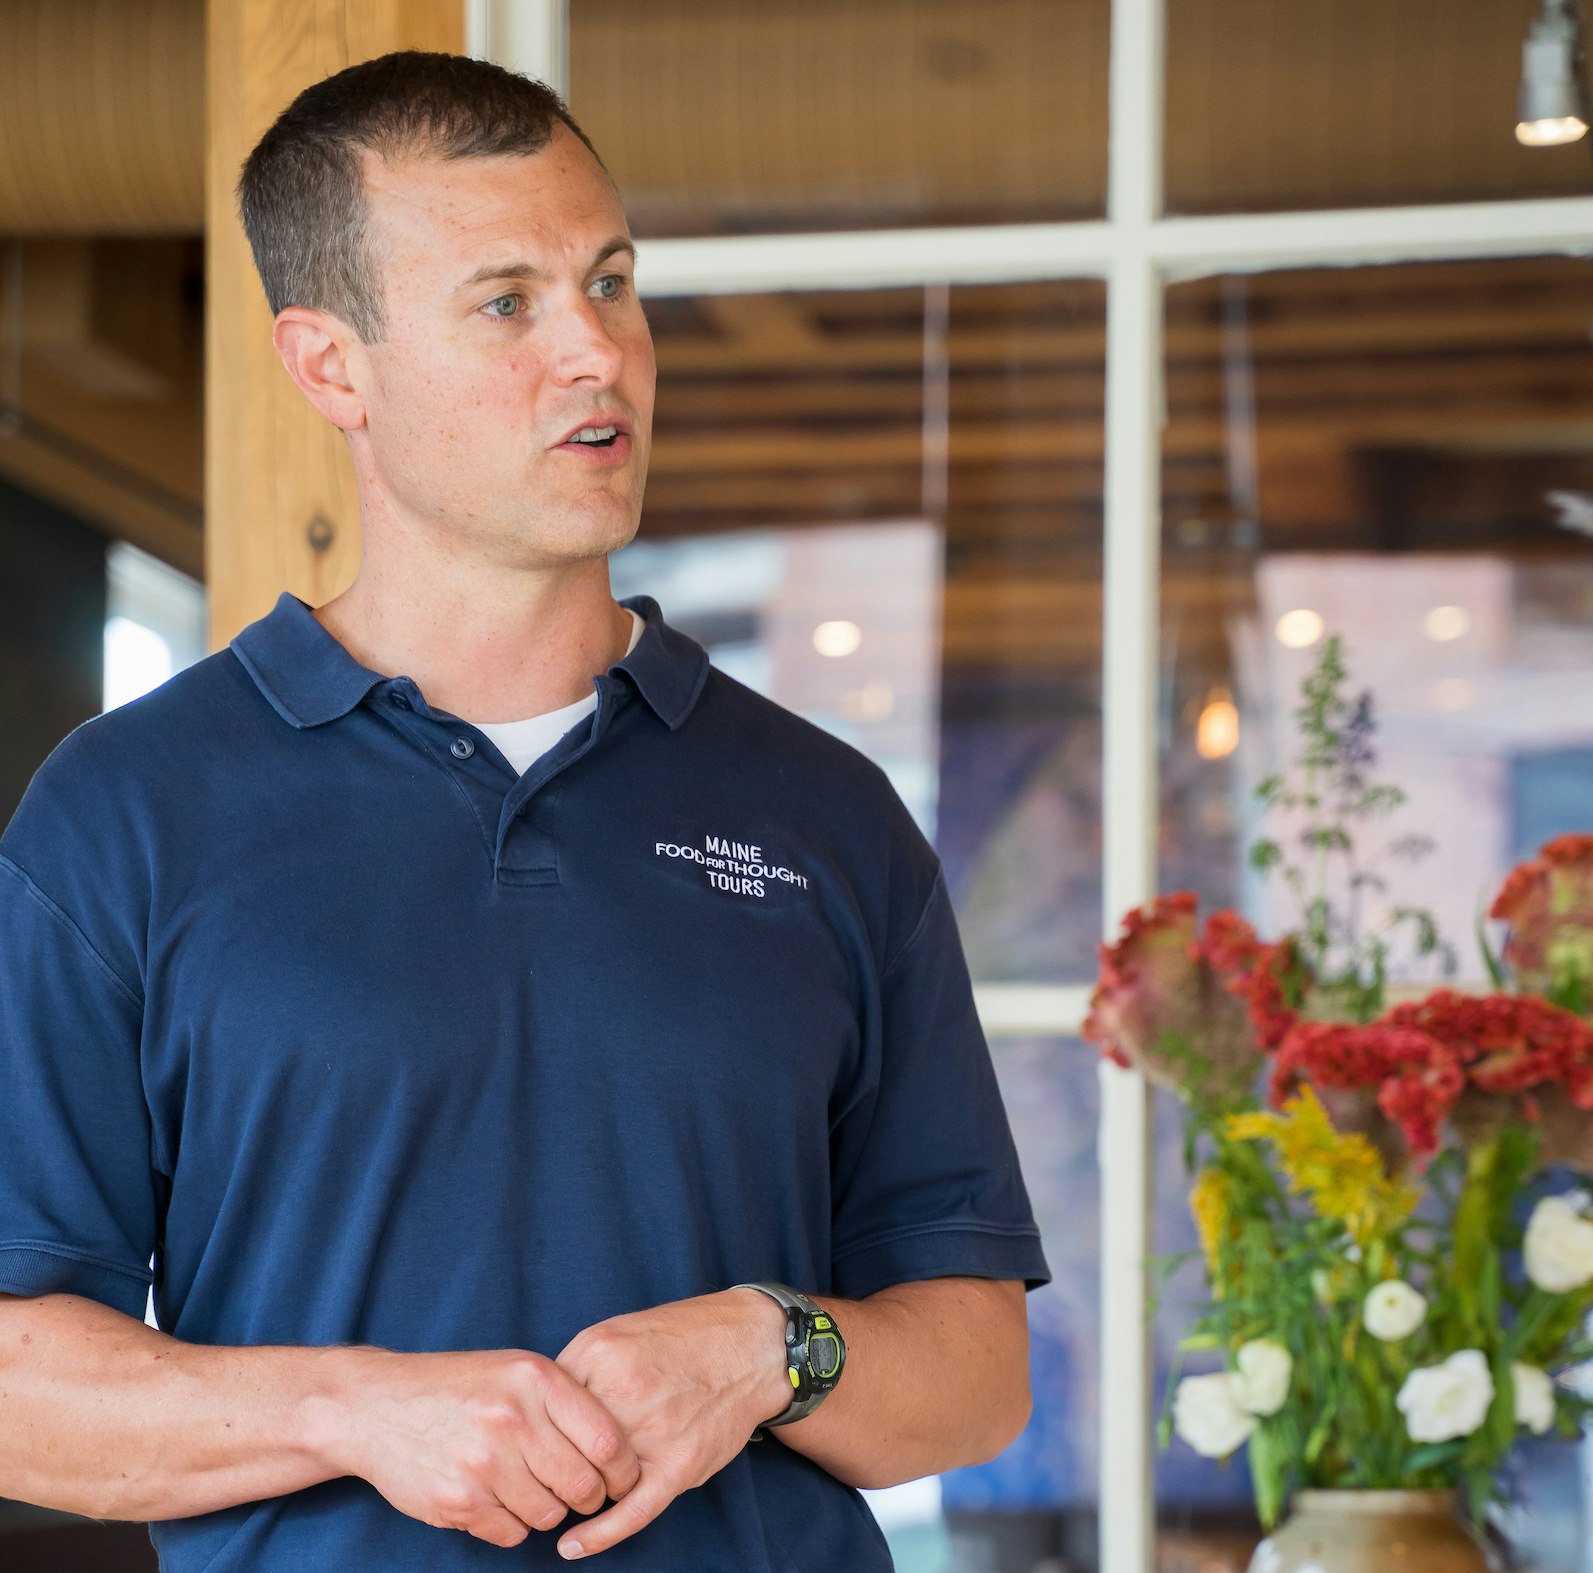 Bryce Hatch, co-founder of Food for Thought Tours, stands by a vase of red and yellow flowers in a blue polo shirt with the name of the business. He looks to his left.